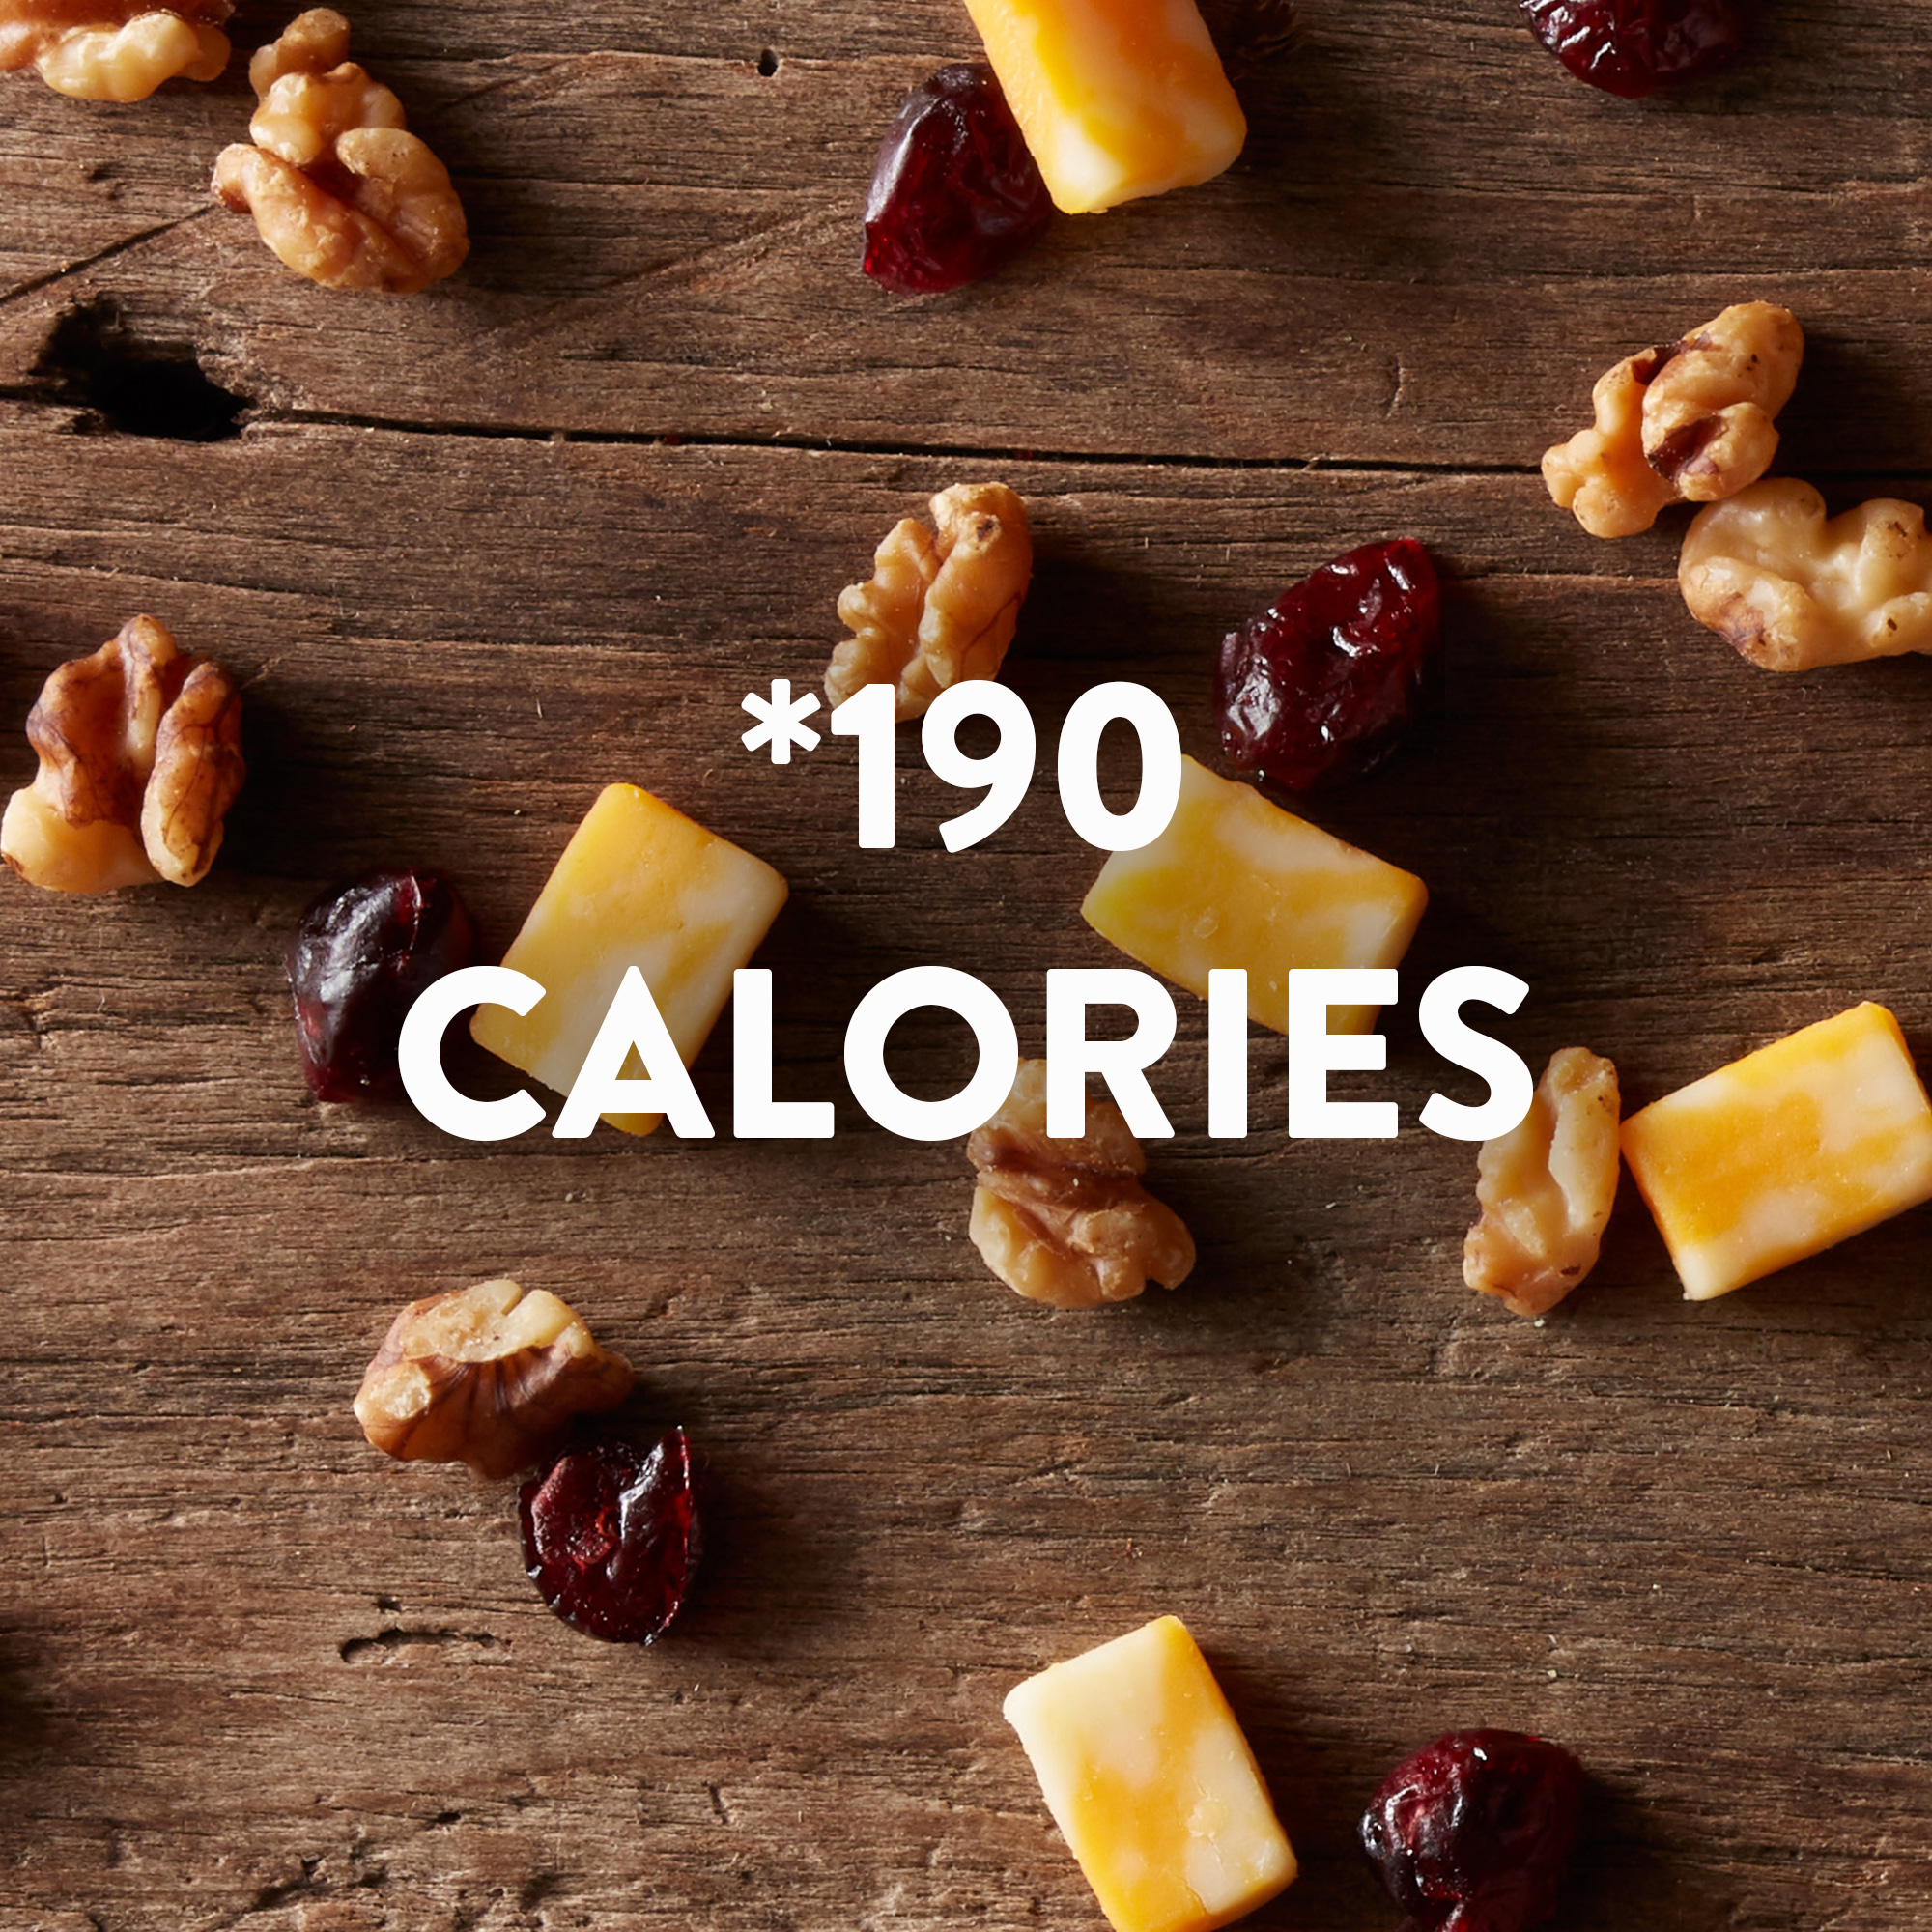 Sargento® Balanced Breaks®, Natural Double Cheddar Cheese, Dried Cranberries and Salted Walnuts